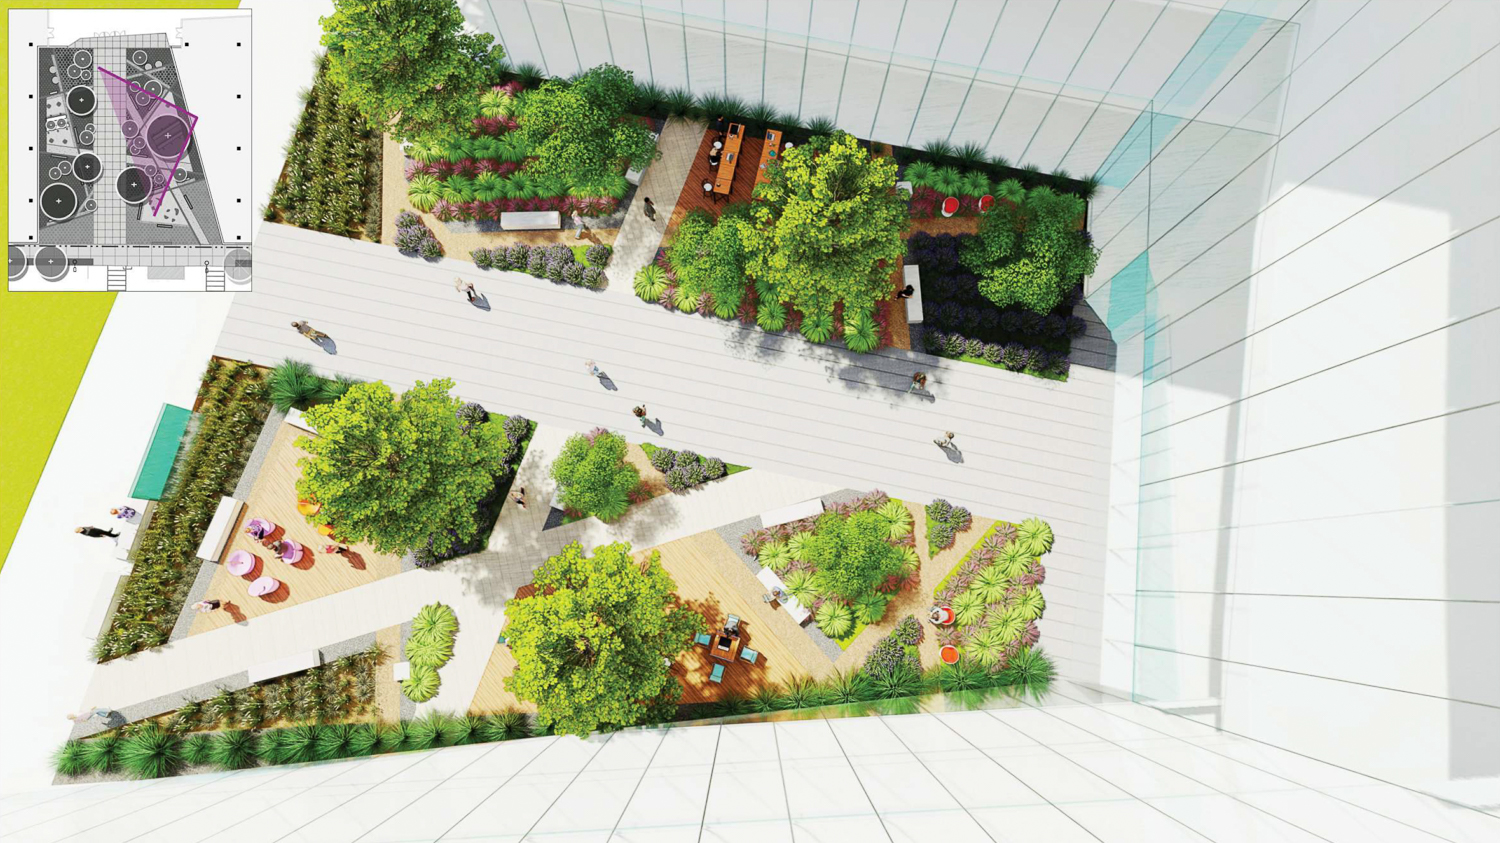 EmeryStation Overland courtyard, rendering by Perkins+Will